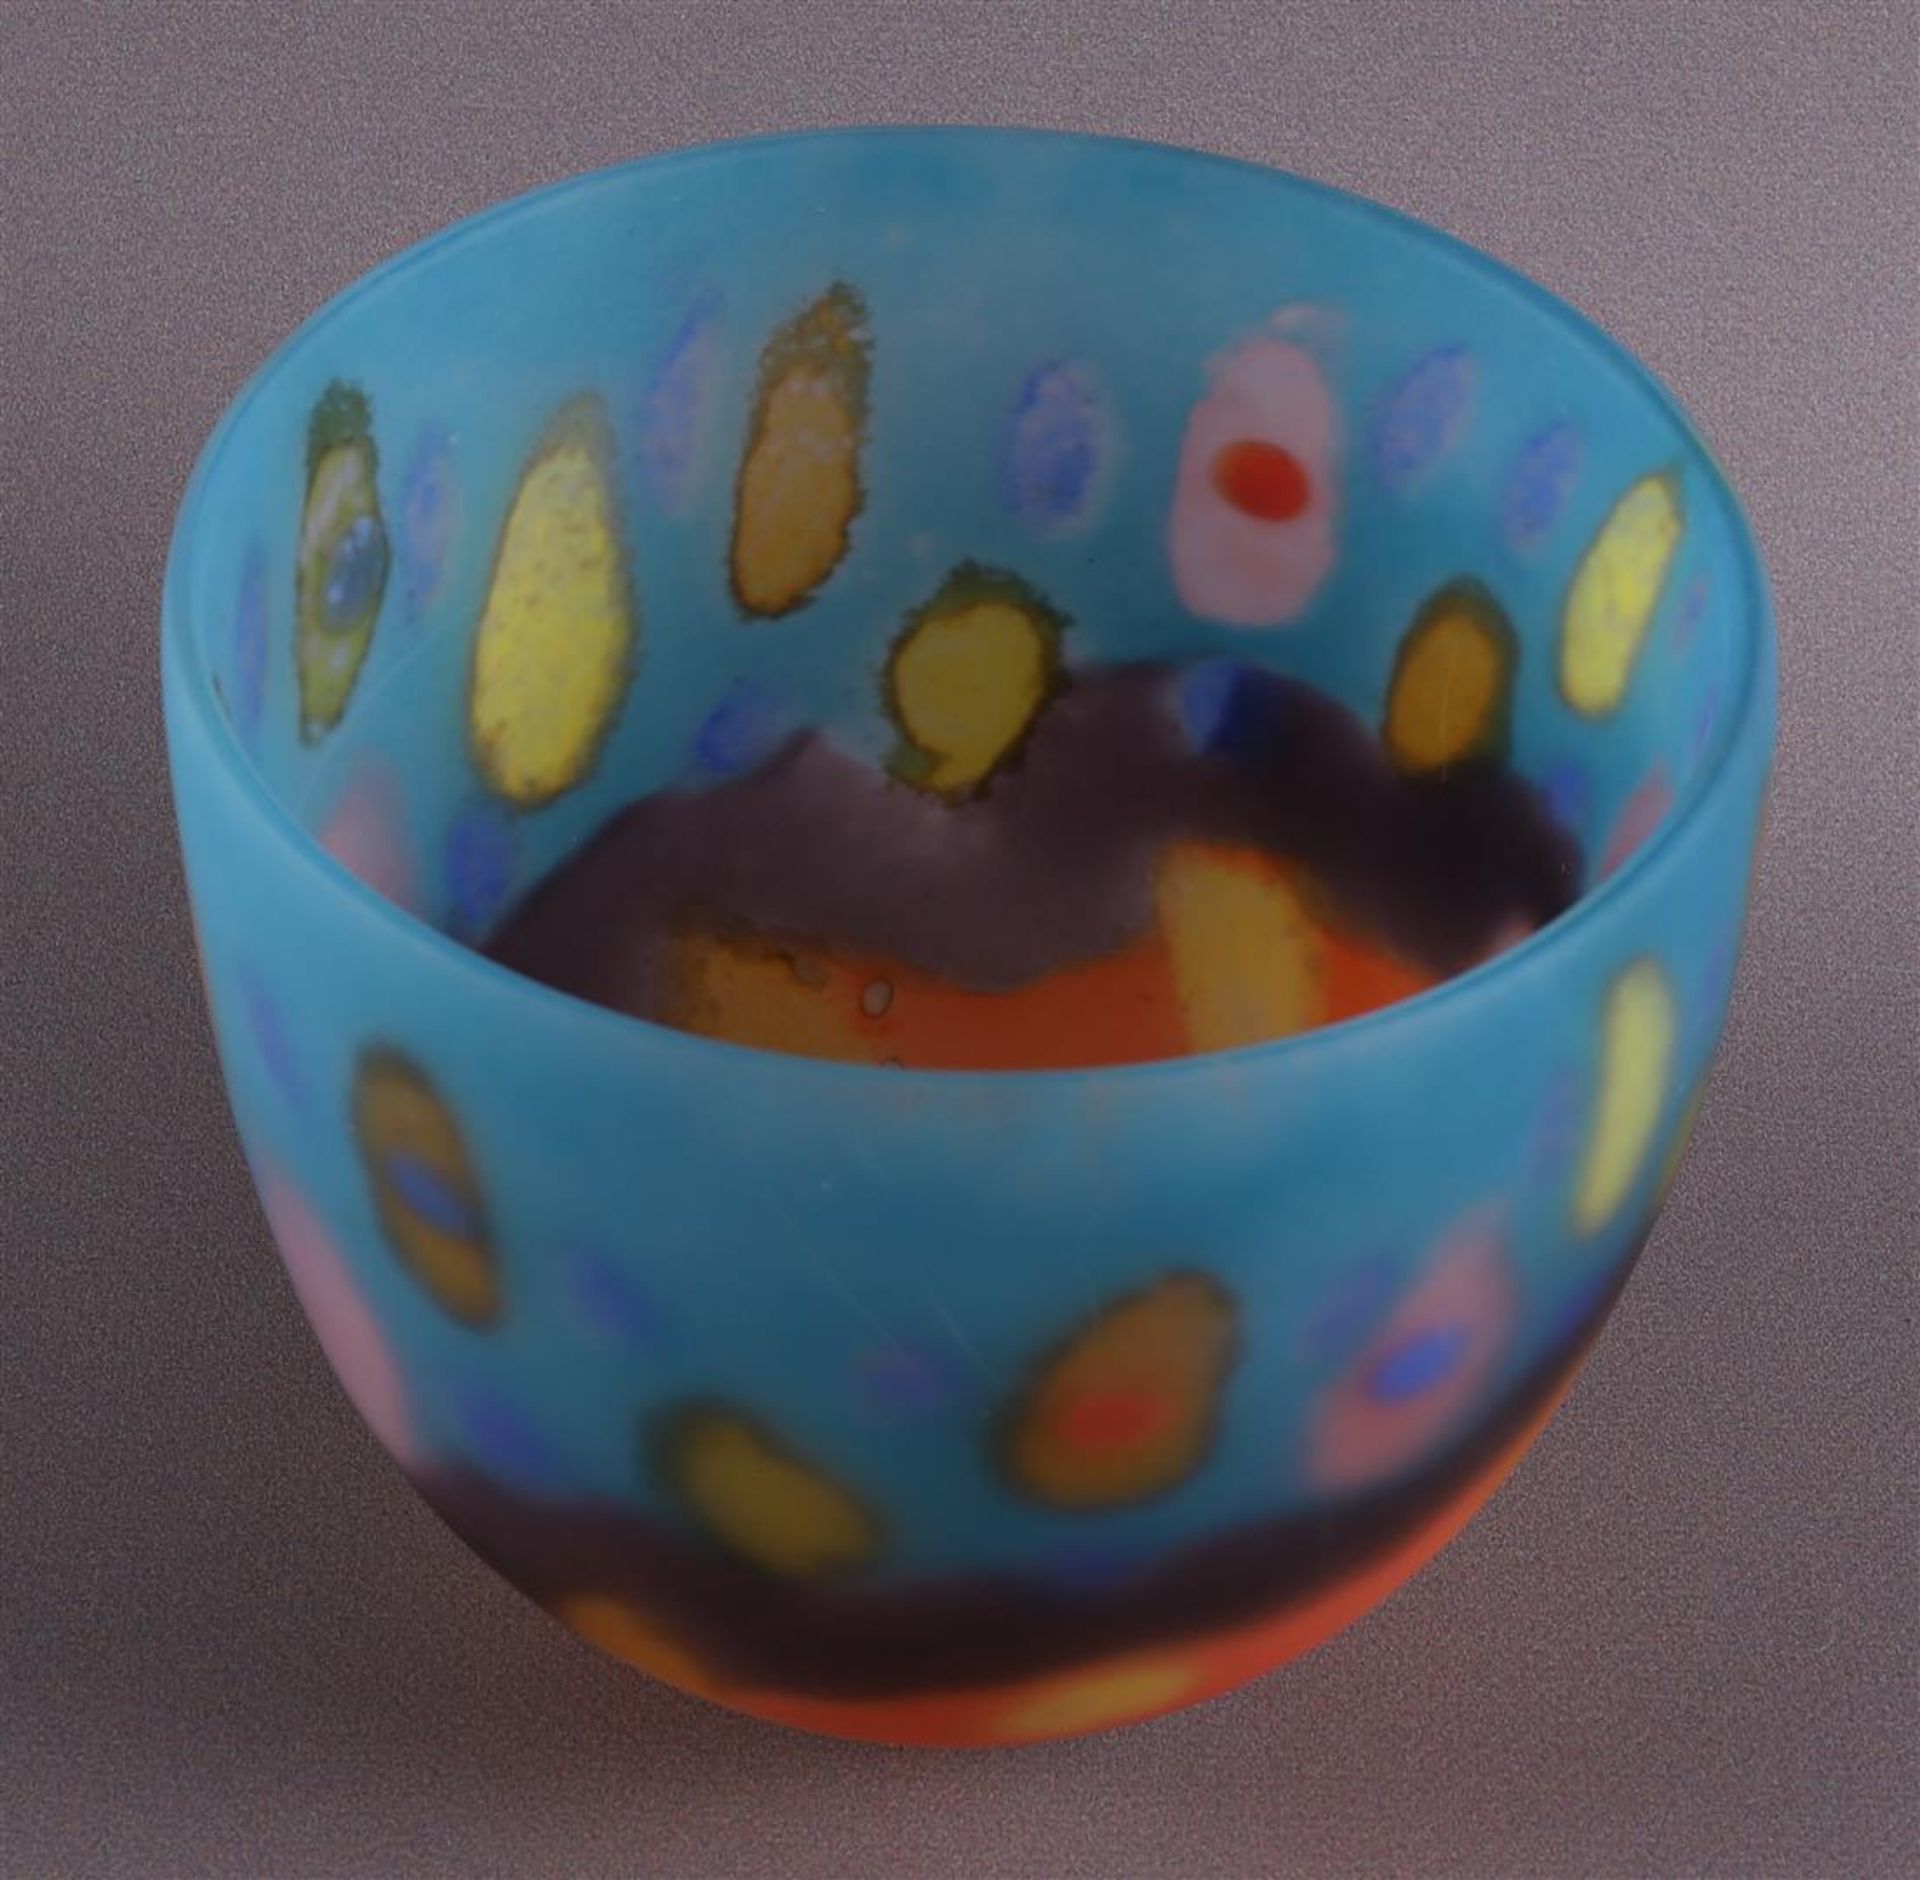 A freely blown polychrome glass vase 'Bowl zone-blue', Pauline Solven. - Image 6 of 8